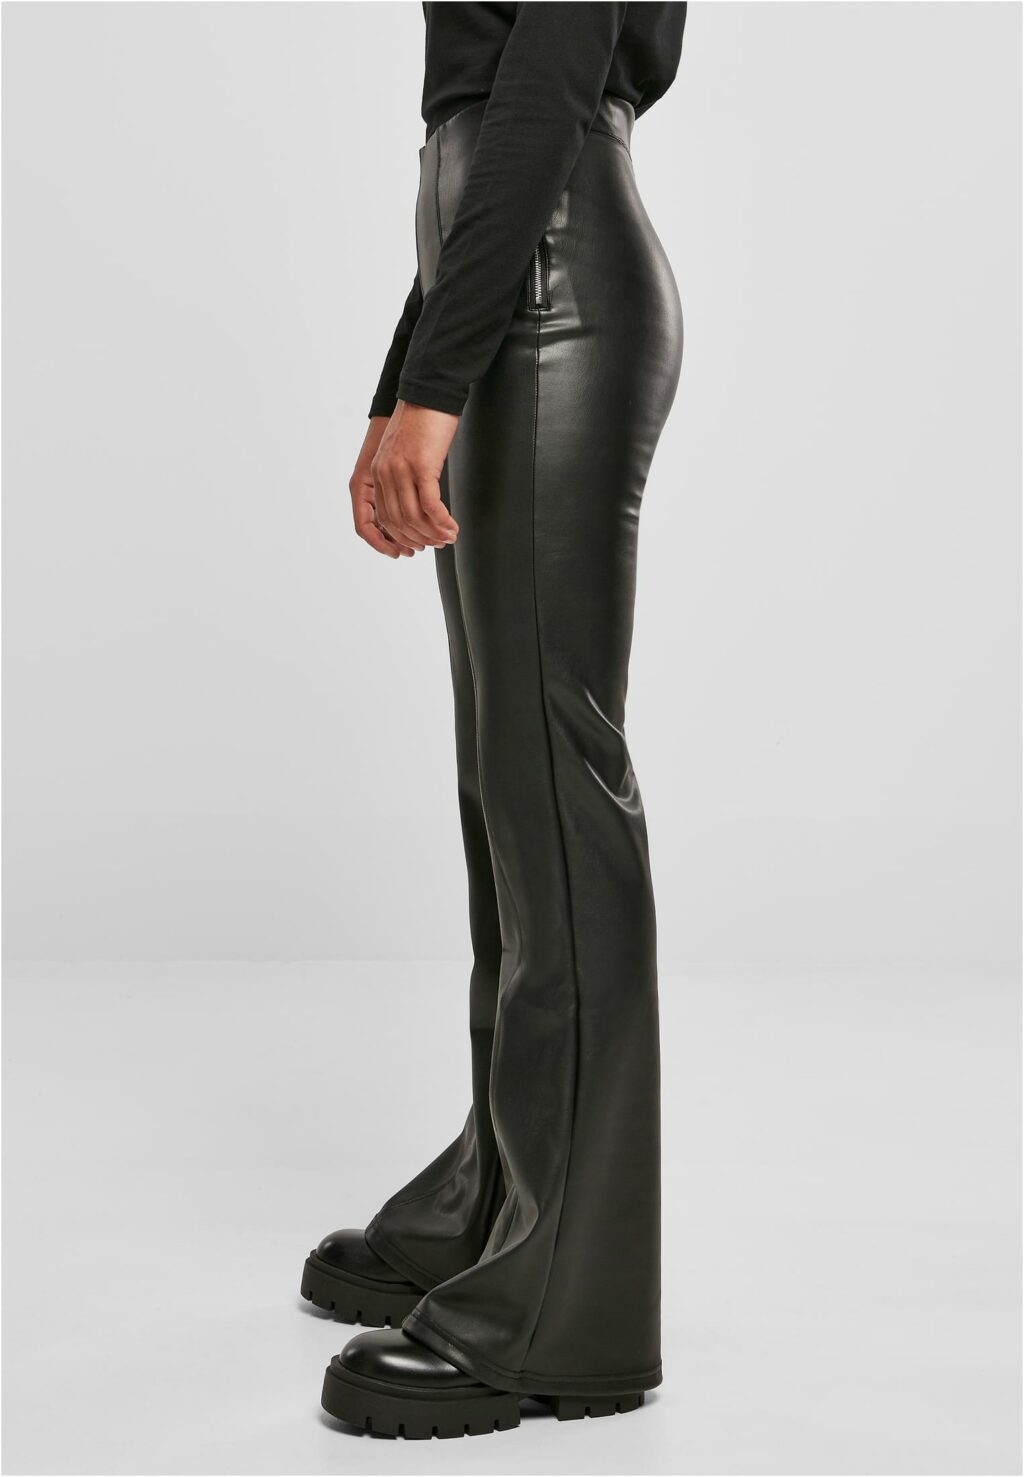 Urban Classics Ladies Synthetic Leather Flared Pants black TB5410